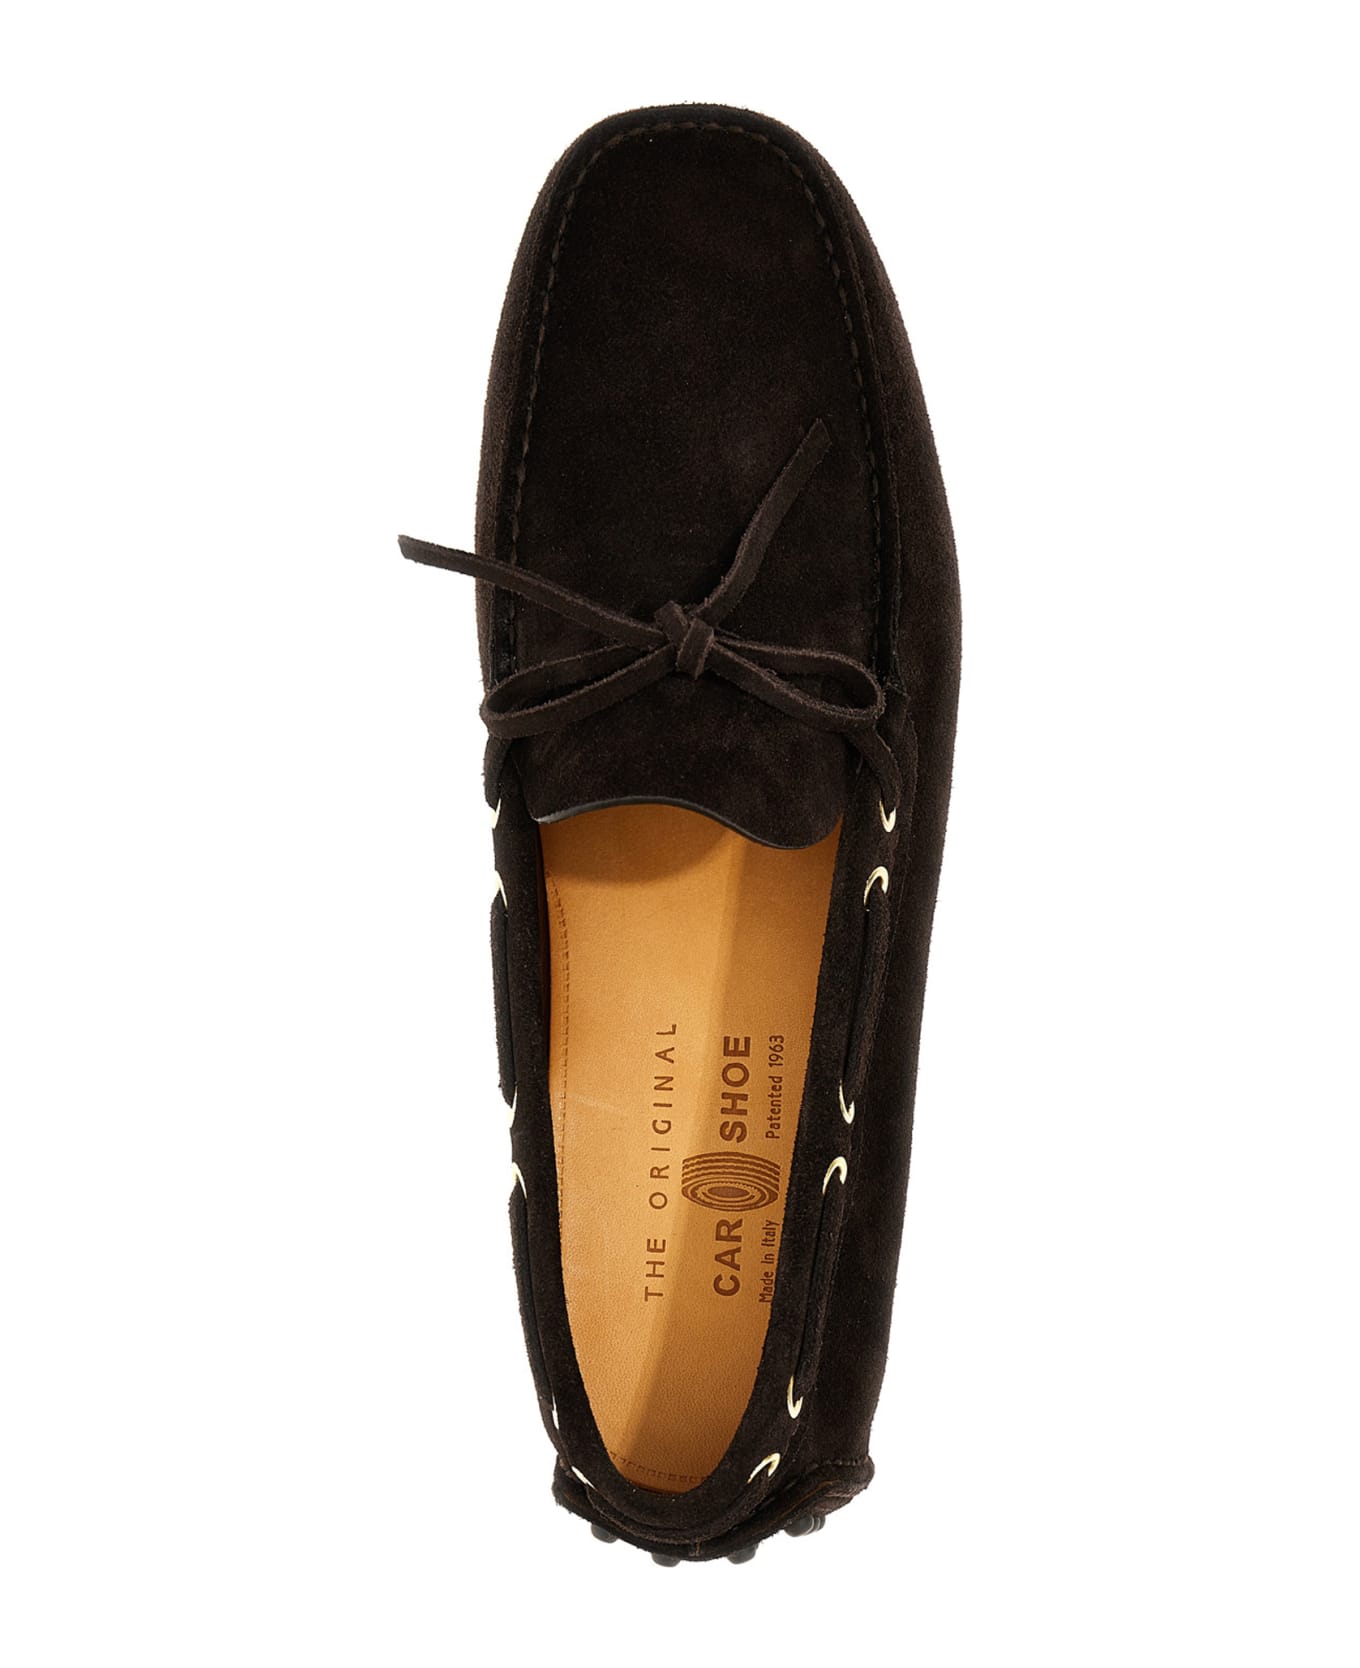 Car Shoe Suede Loafers - Brown